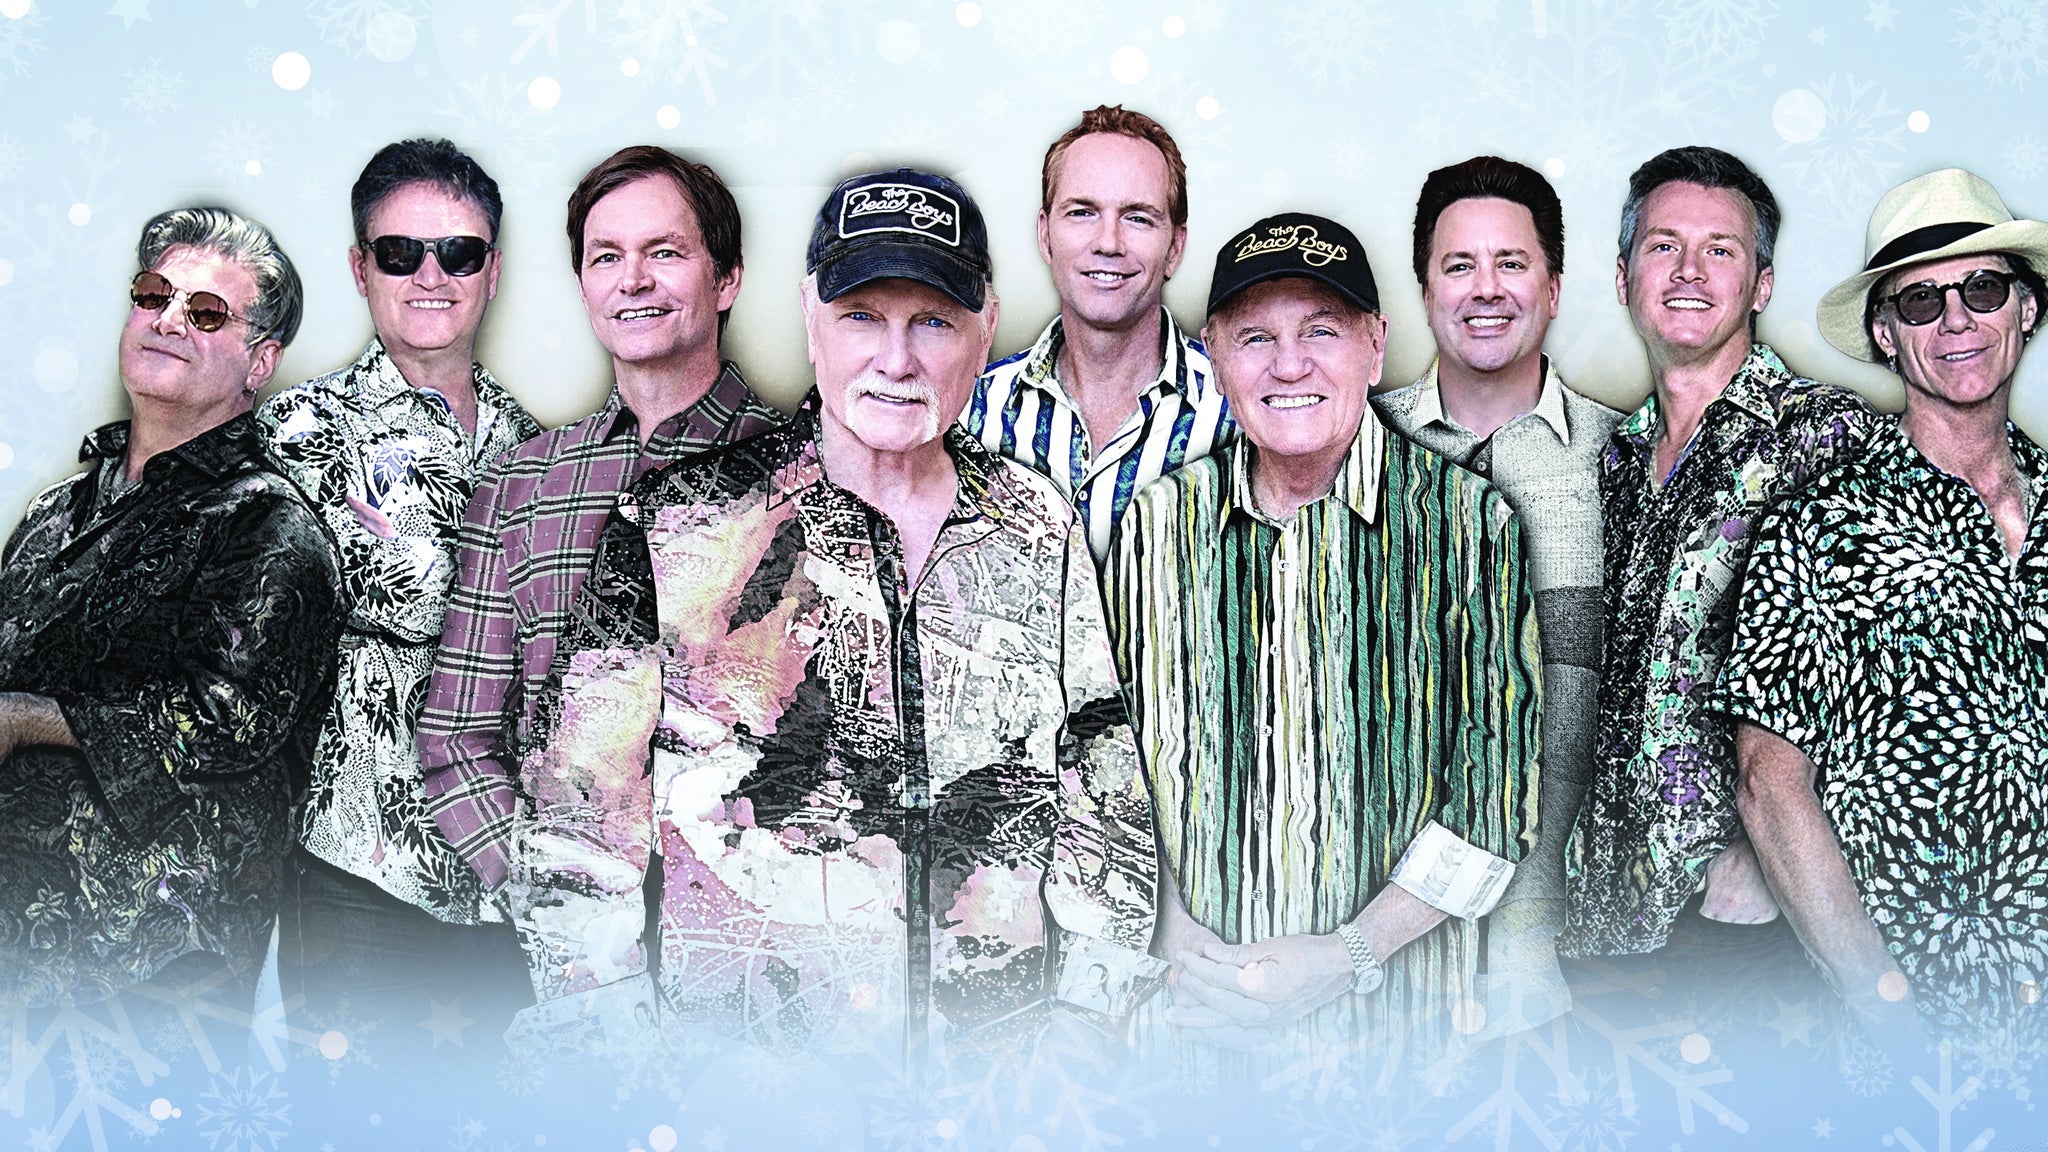 'Tis the Season: The Beach Boys feat. Holiday Vibrations Orchestra in Akron promo photo for Official Platinum presale offer code